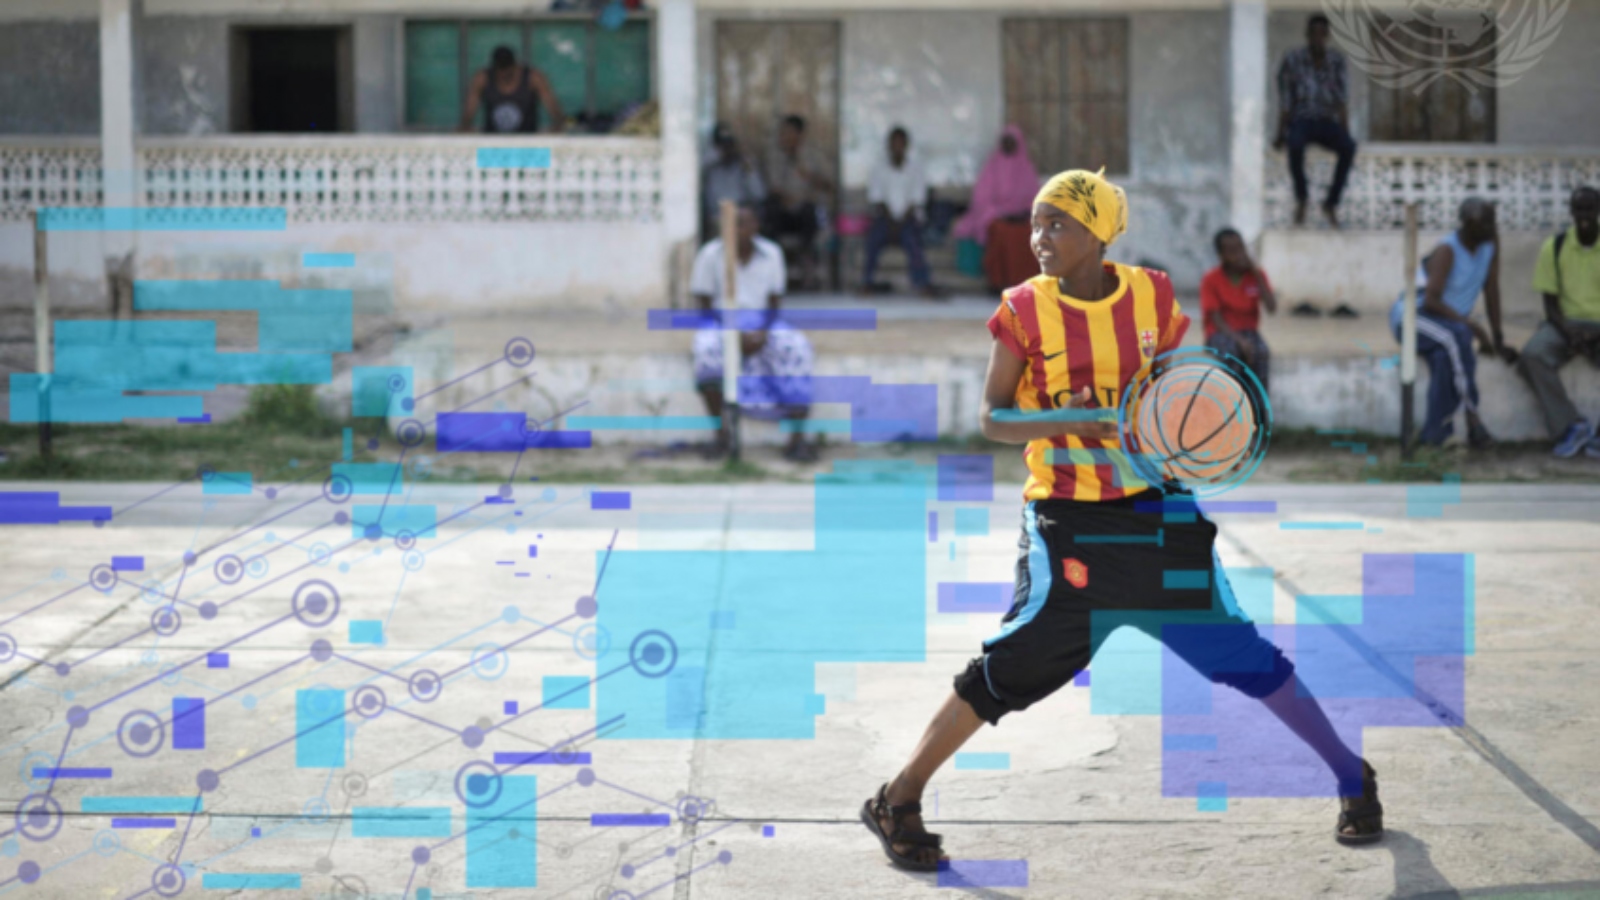 The role of technology in advancing sport for development and peace